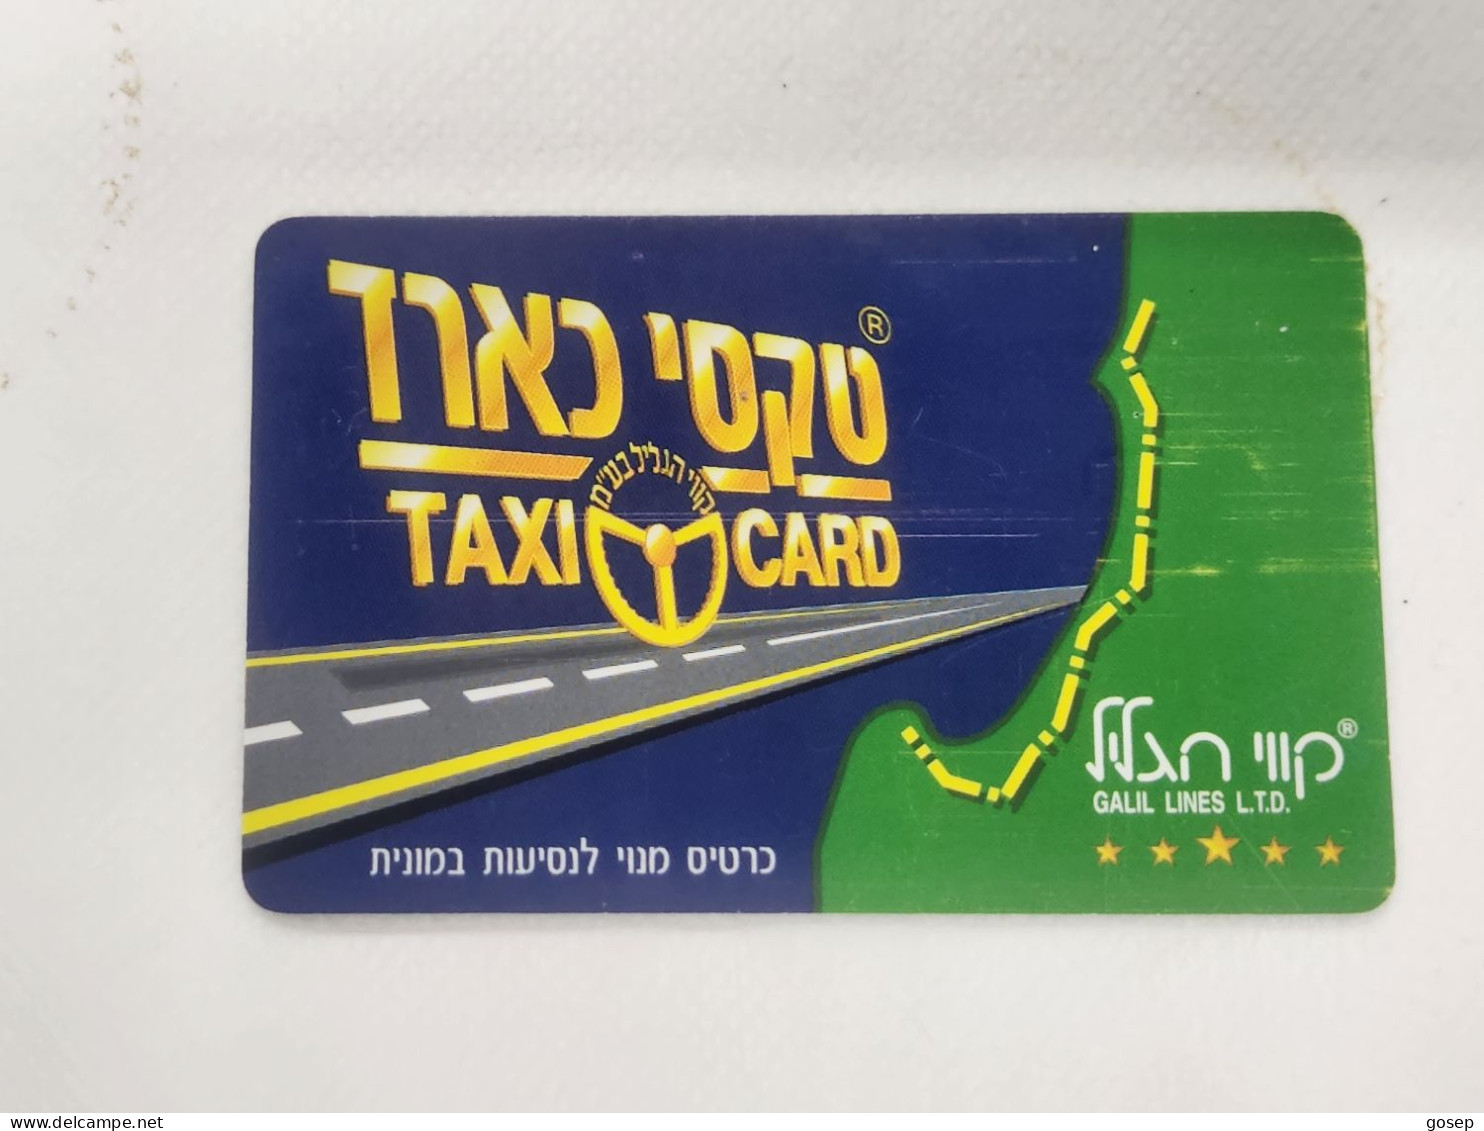 ISRAEL-TAXI-CARD-GALIL LINES-(1)-subscription Card For Taxi Travel-(10018)-good Card+1card Prepiad Free - Moto